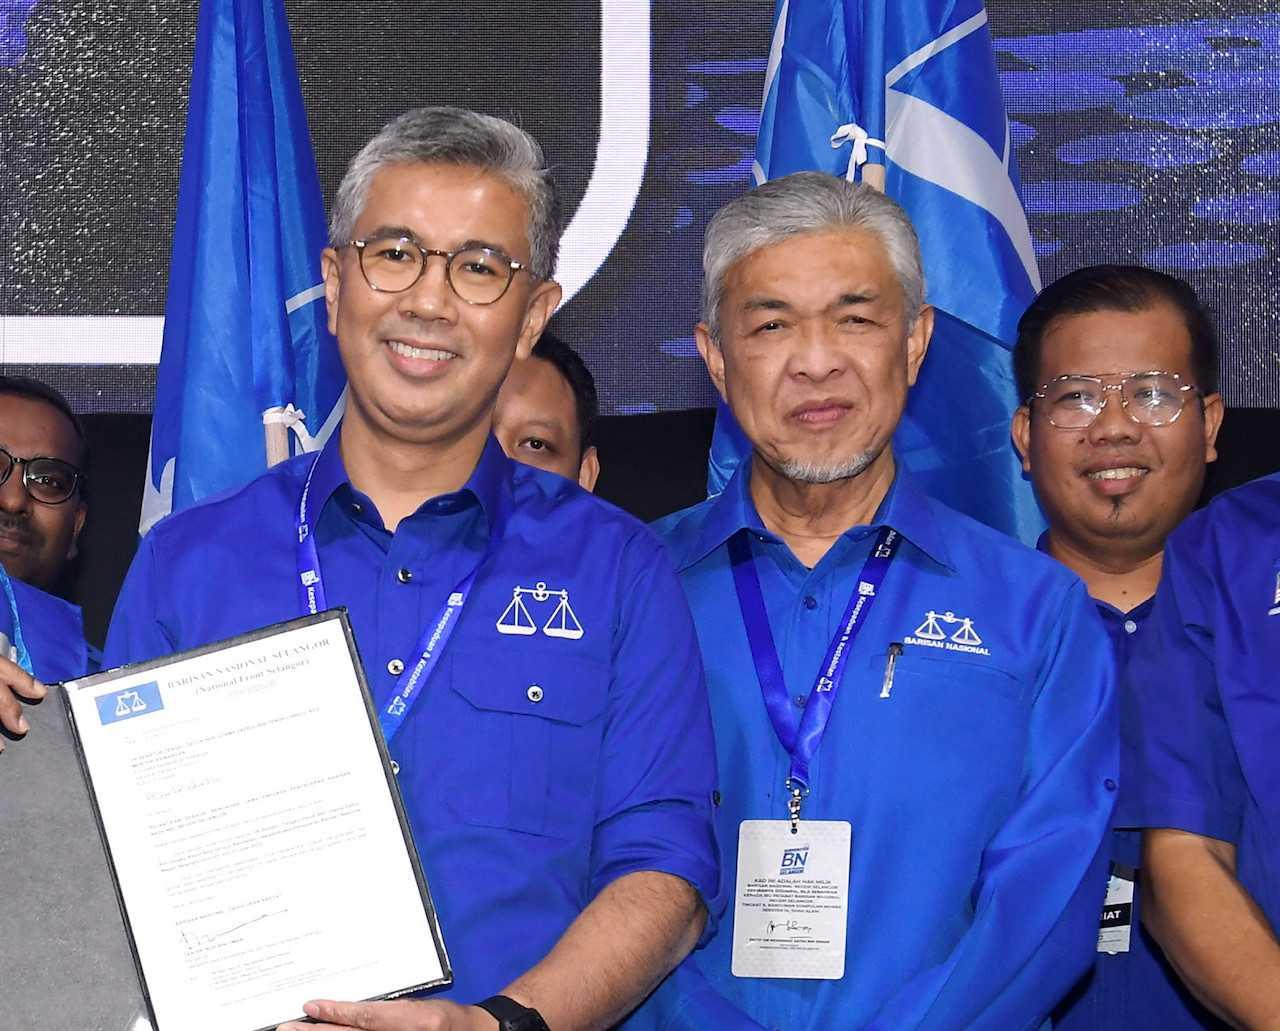 Finance Minister Tengku Zafrul Aziz (left) receives the letter of appointment as Selangor Barisan Nasional treasurer, flanked by BN chairman Ahmad Zahid Hamidi at the closing ceremony of the coalition's convention in Shah Alam on July 31. Photo: Bernama
